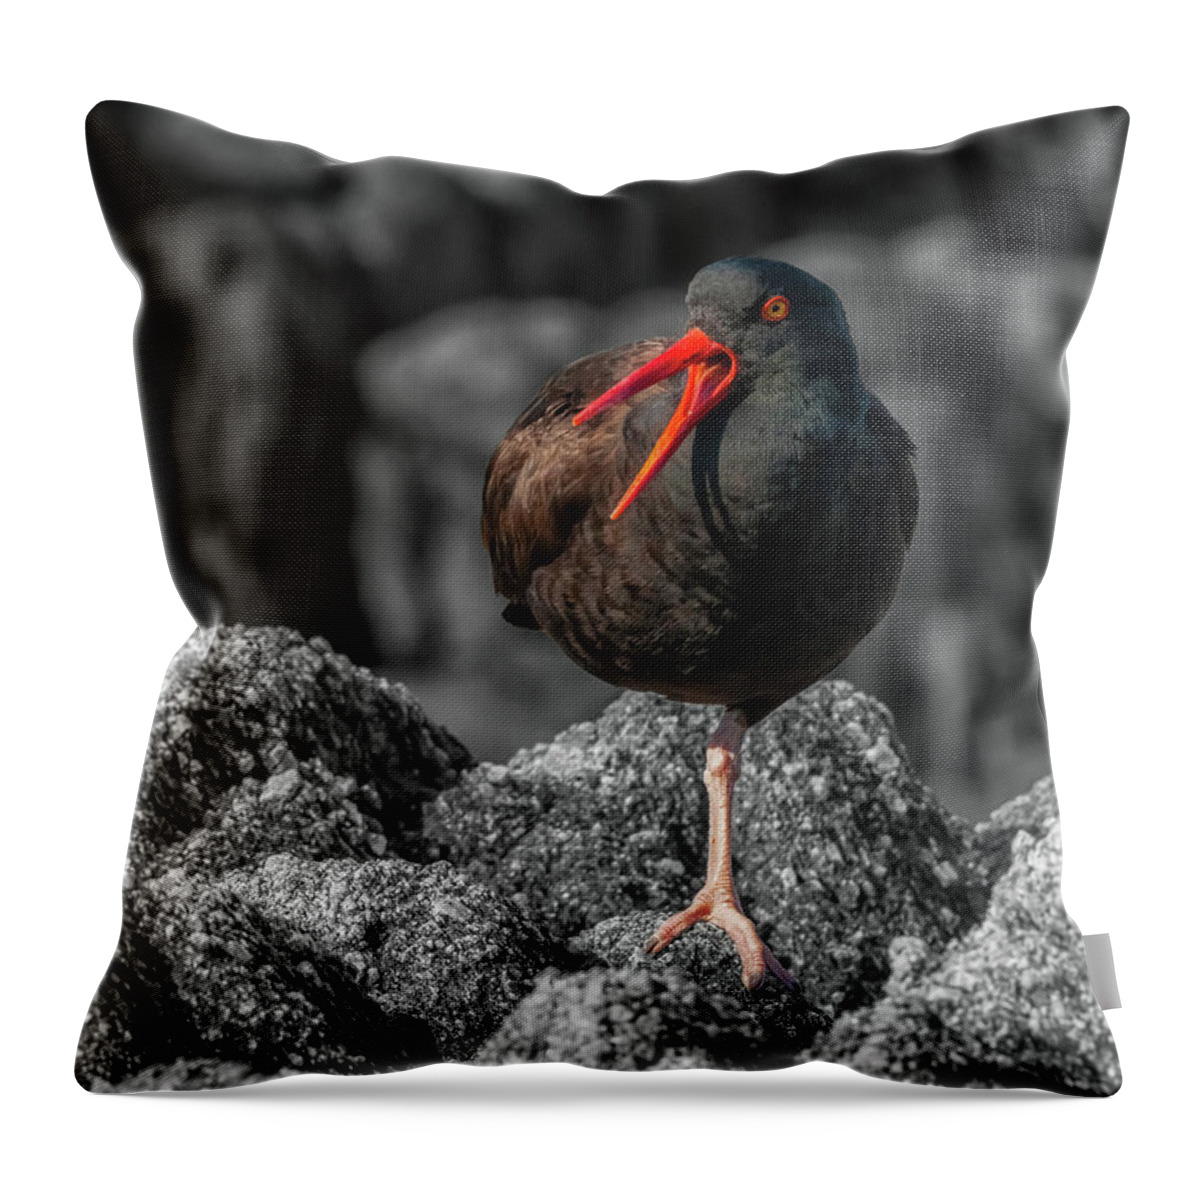  Wildlife Throw Pillow featuring the photograph Balancing Act by Jonathan Nguyen